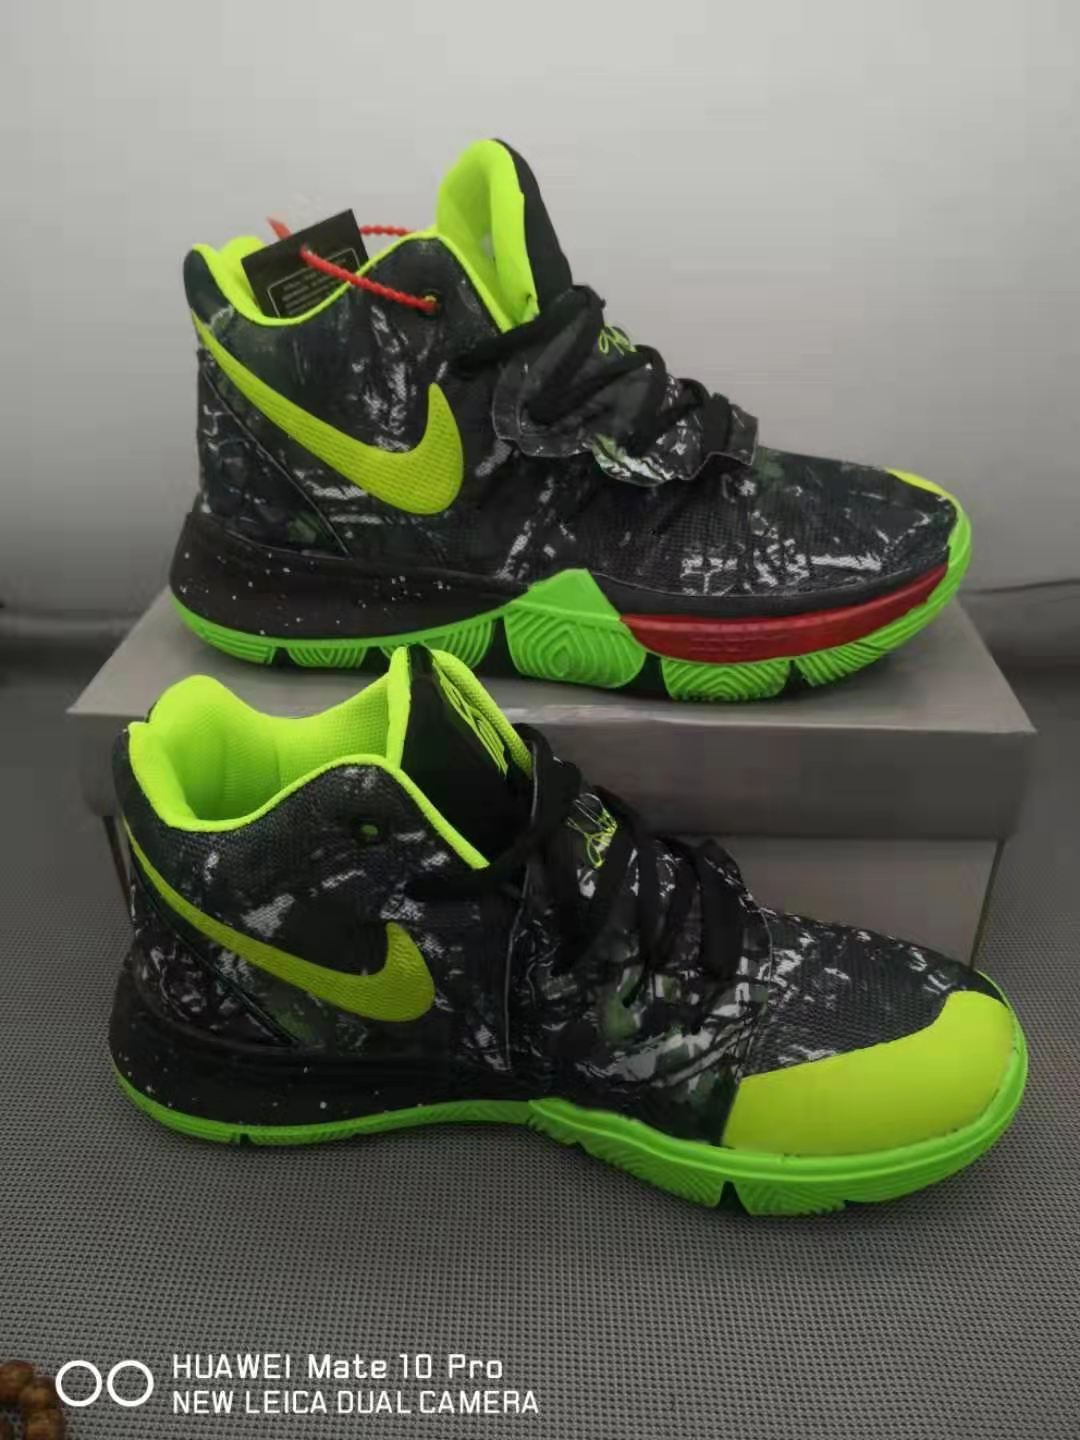 kyrie irving shoes nike